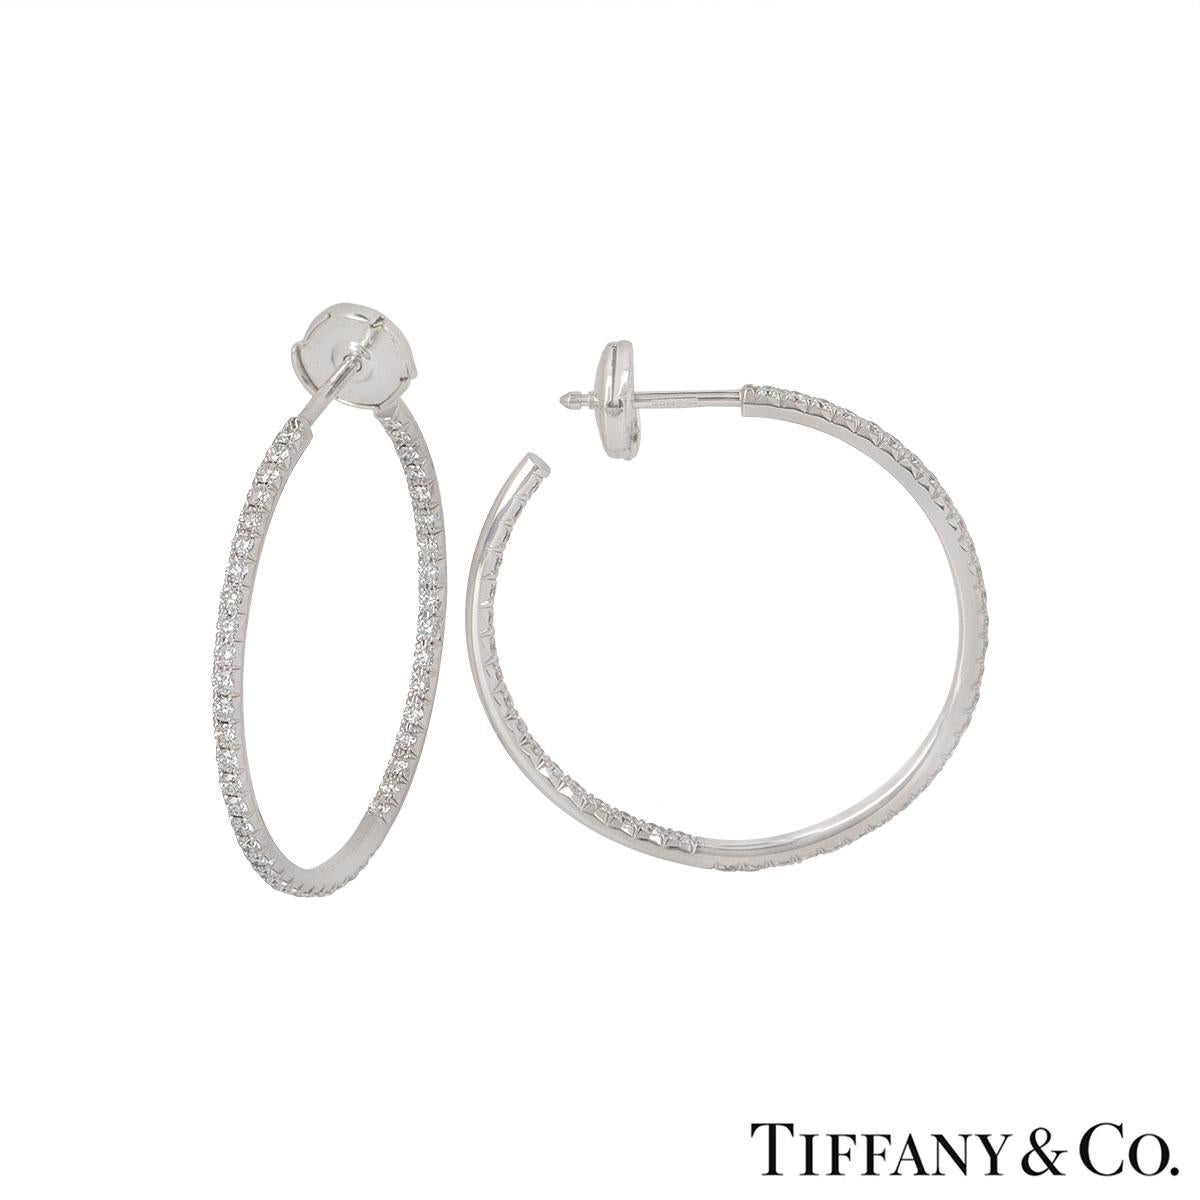 A pair of 18k white gold diamond hoop earrings by Tiffany & Co. The earrings consist of approximately 96 round brilliant cut diamonds set on the outer and inner line of the hoops with an approximate total weight of 0.96ct. The earrings feature post